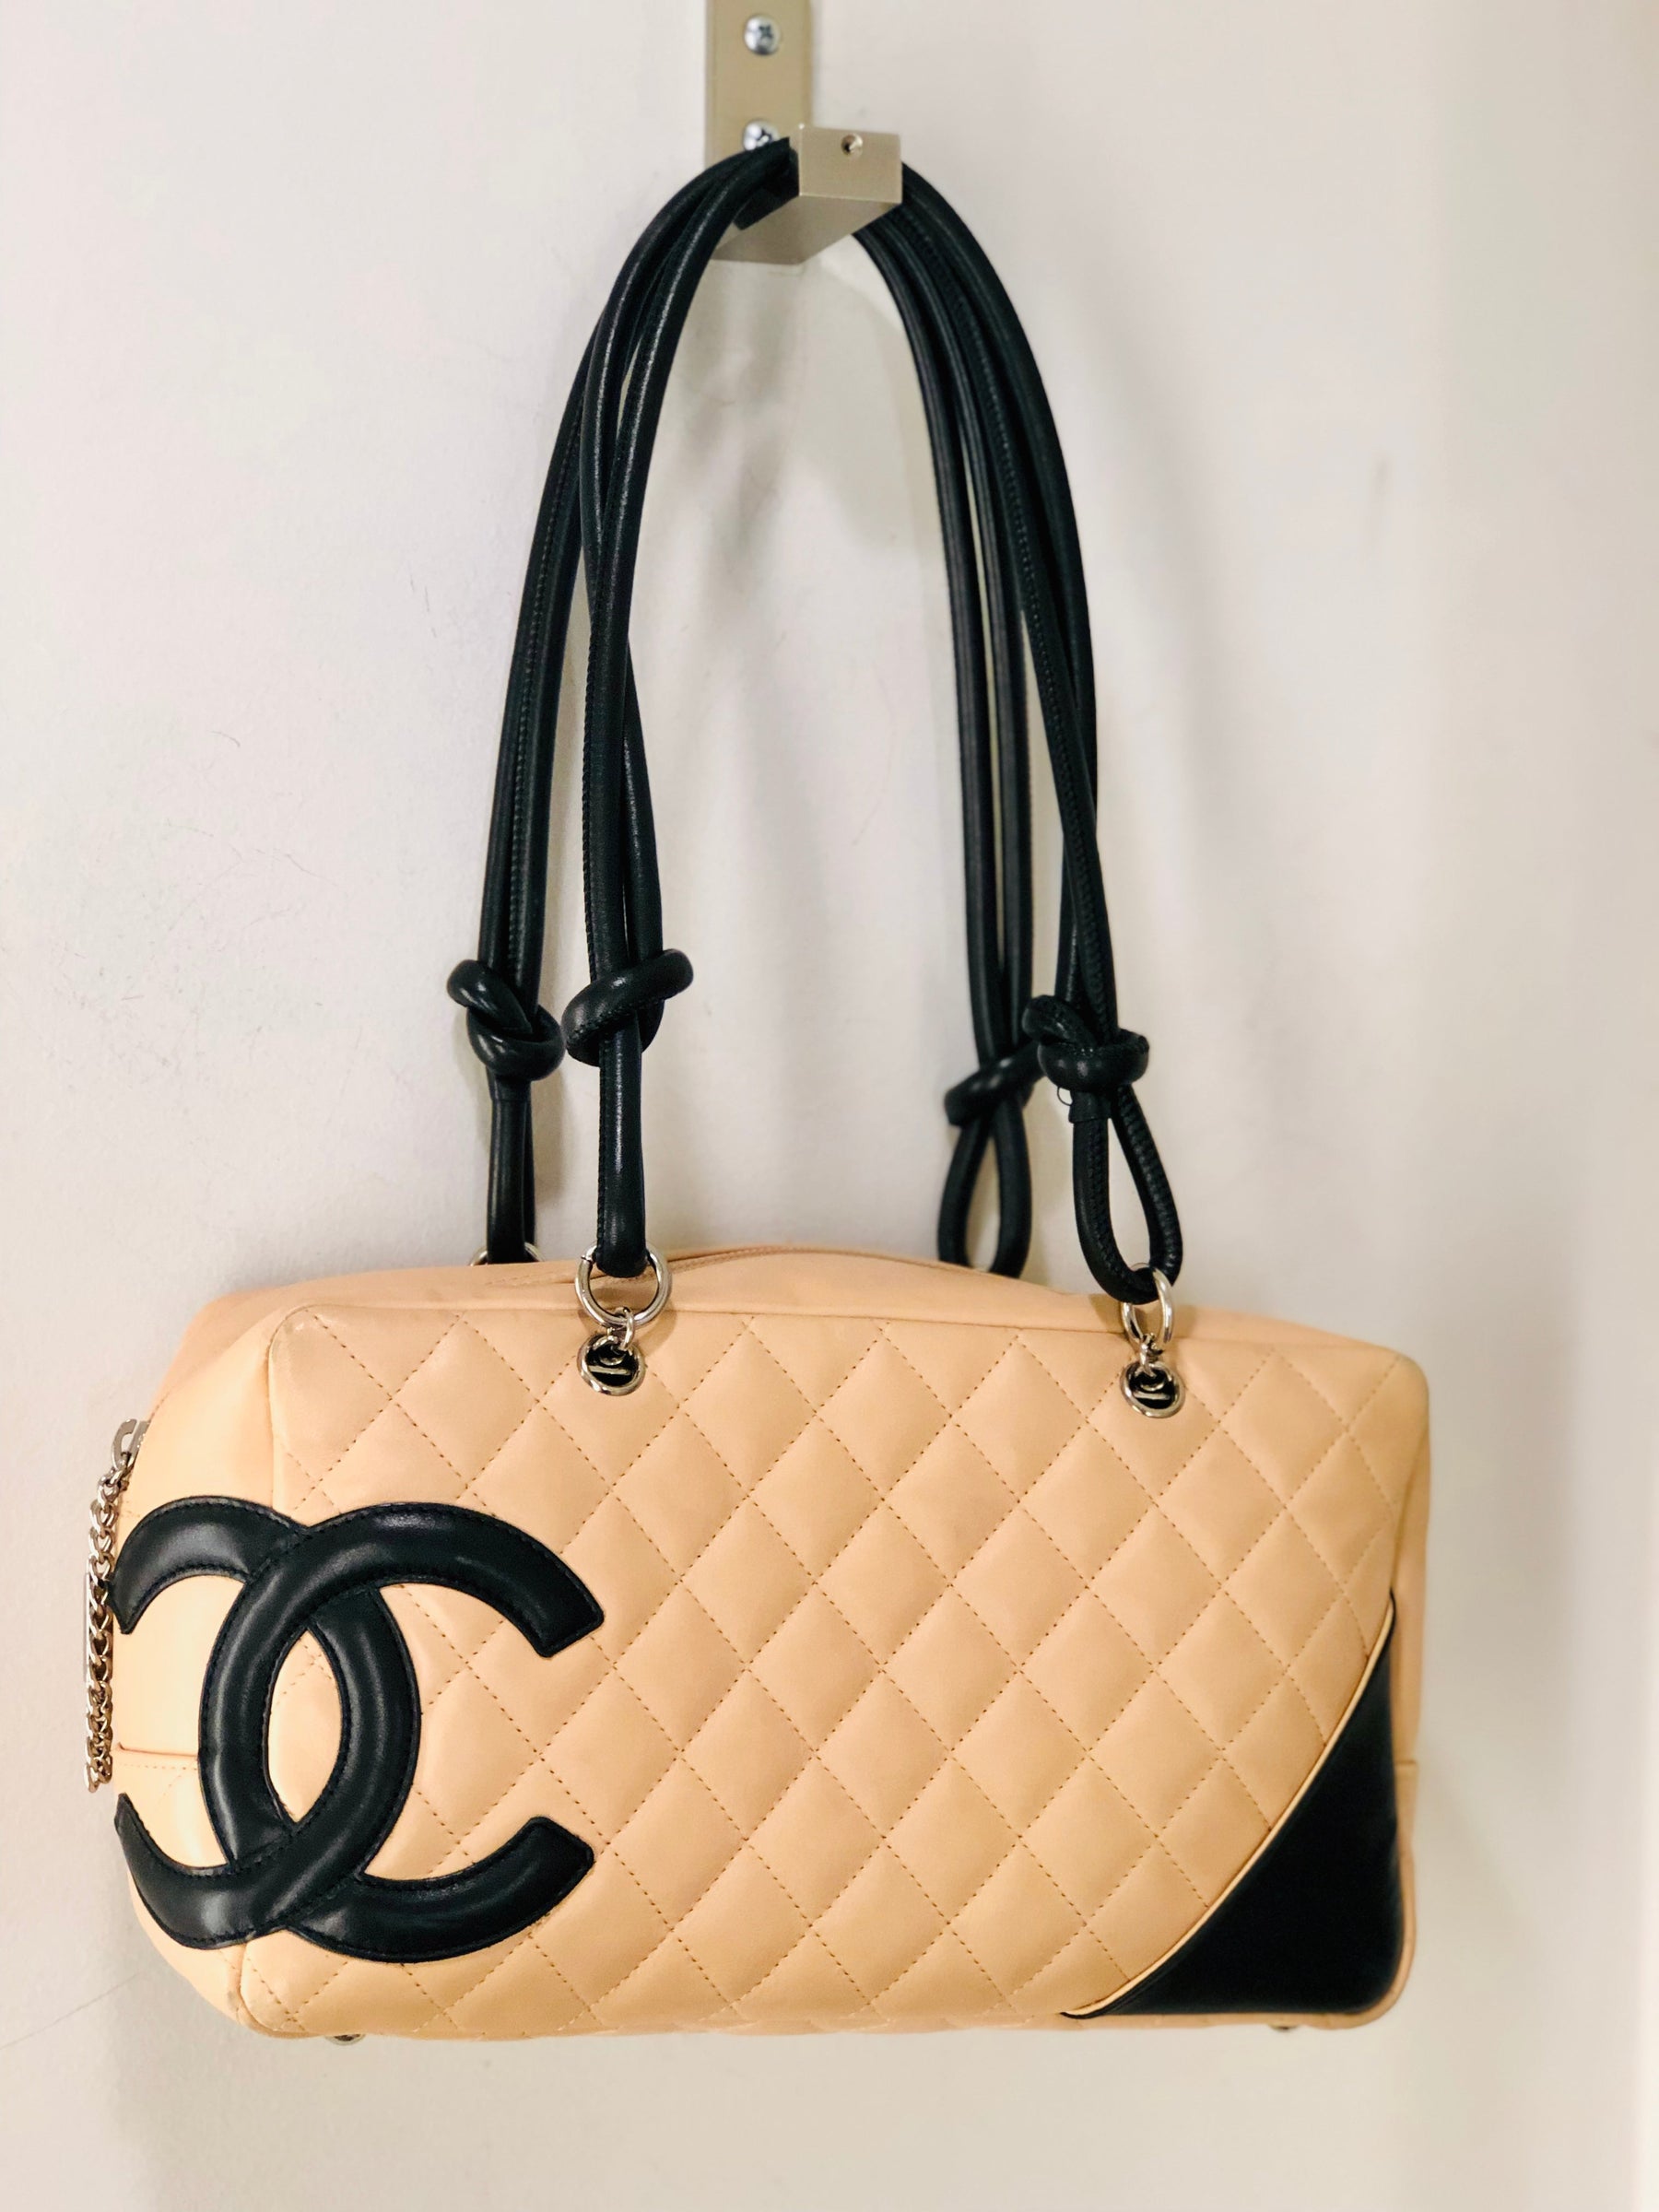 Chanel Cambon Bowler Leather Bag Tan and Black